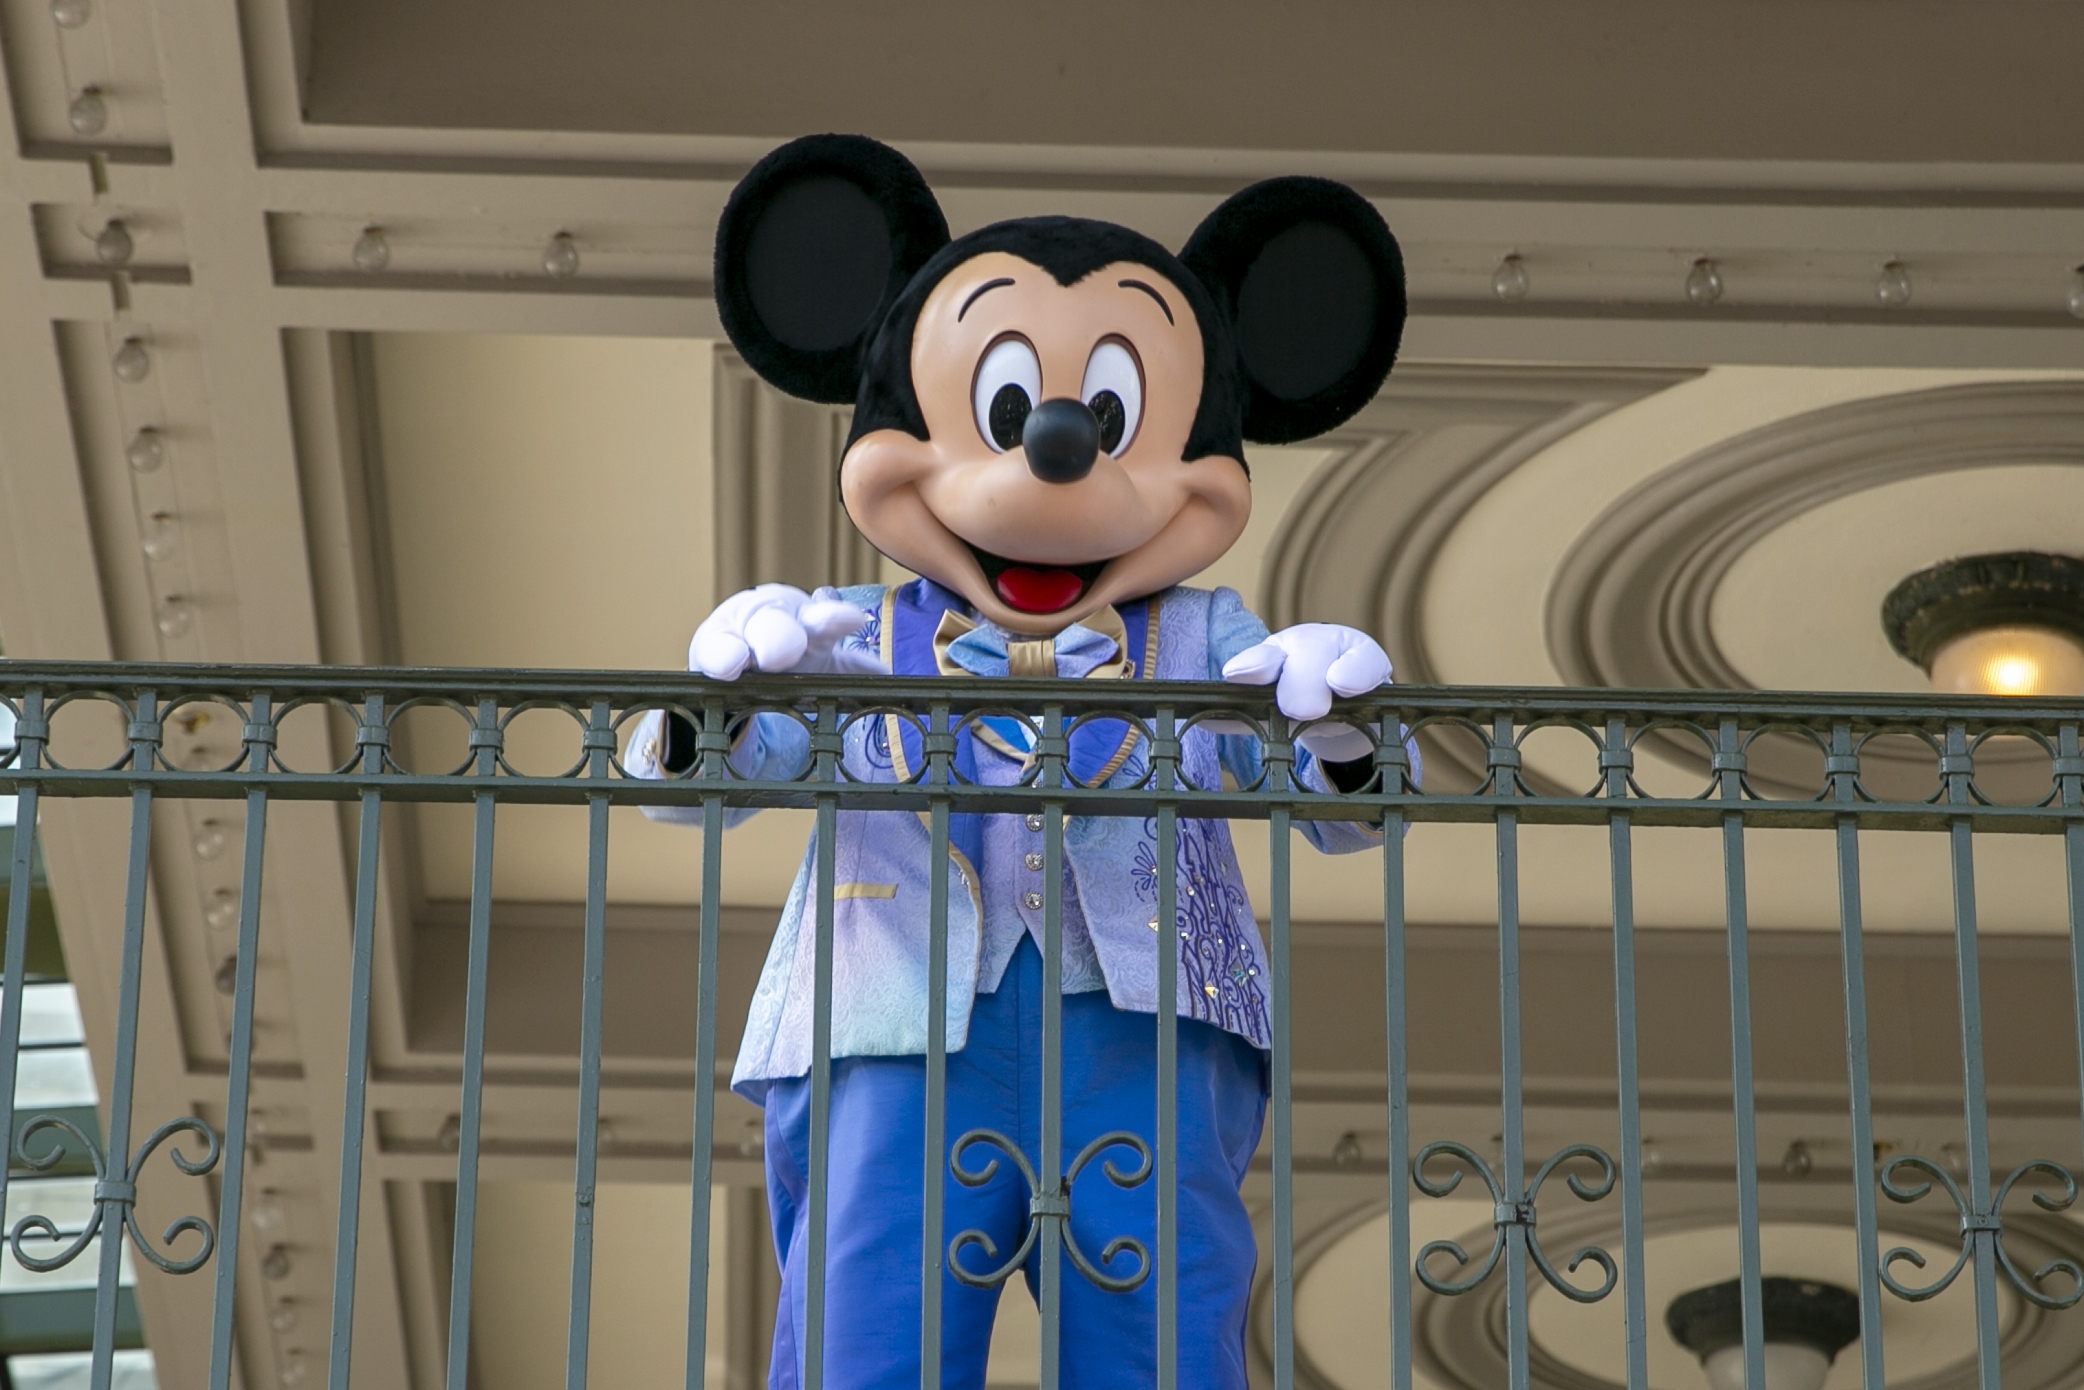 Earliest version of Mickey Mouse set to public domain in 2024